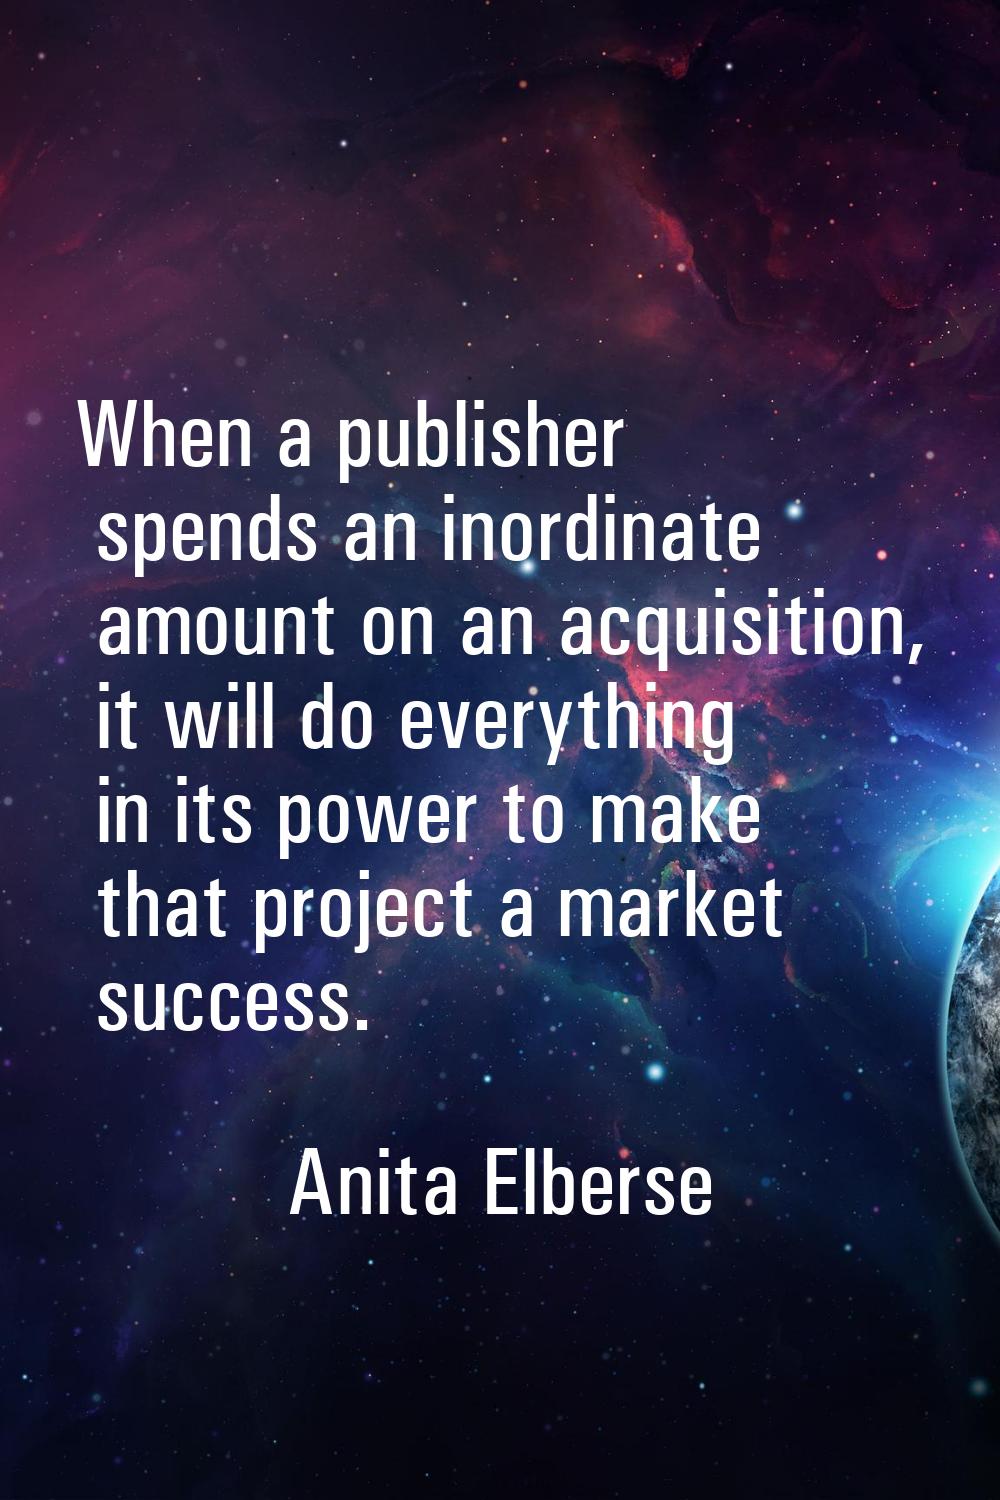 When a publisher spends an inordinate amount on an acquisition, it will do everything in its power 